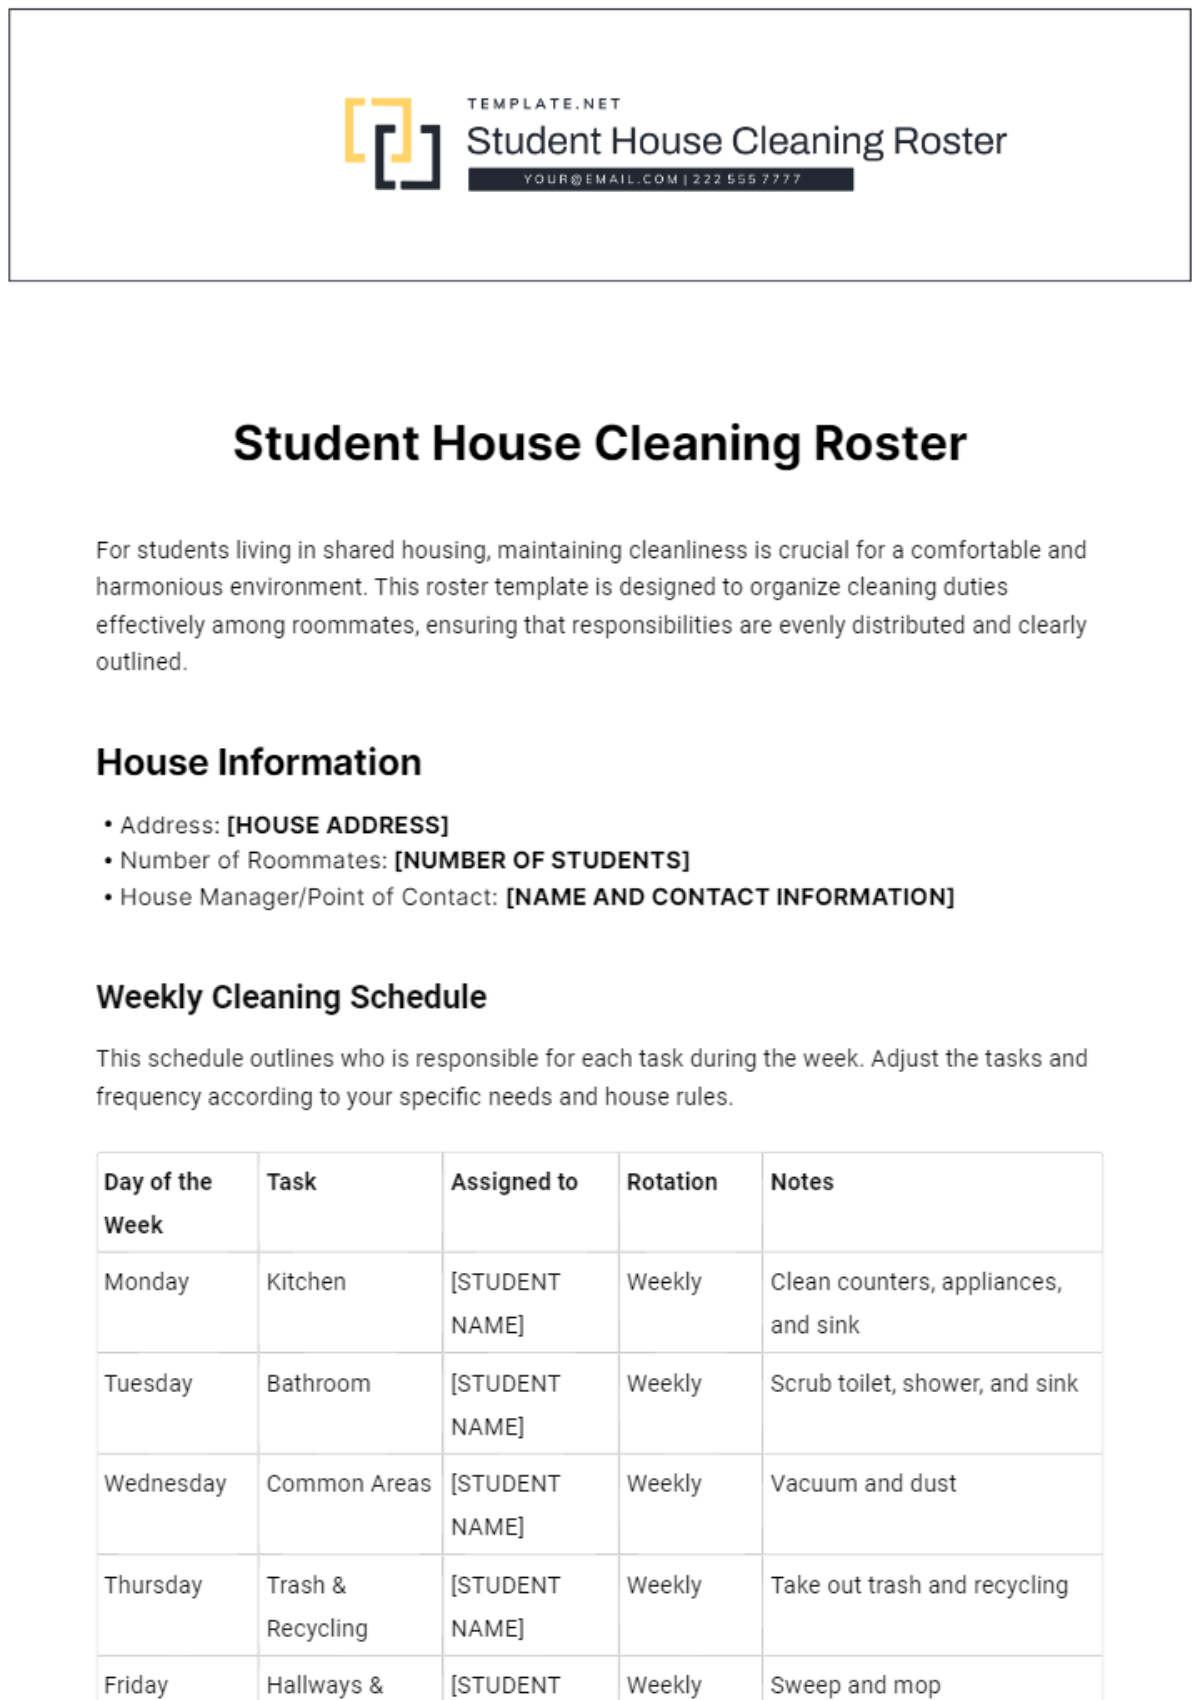 Free Student House Cleaning Roster Template